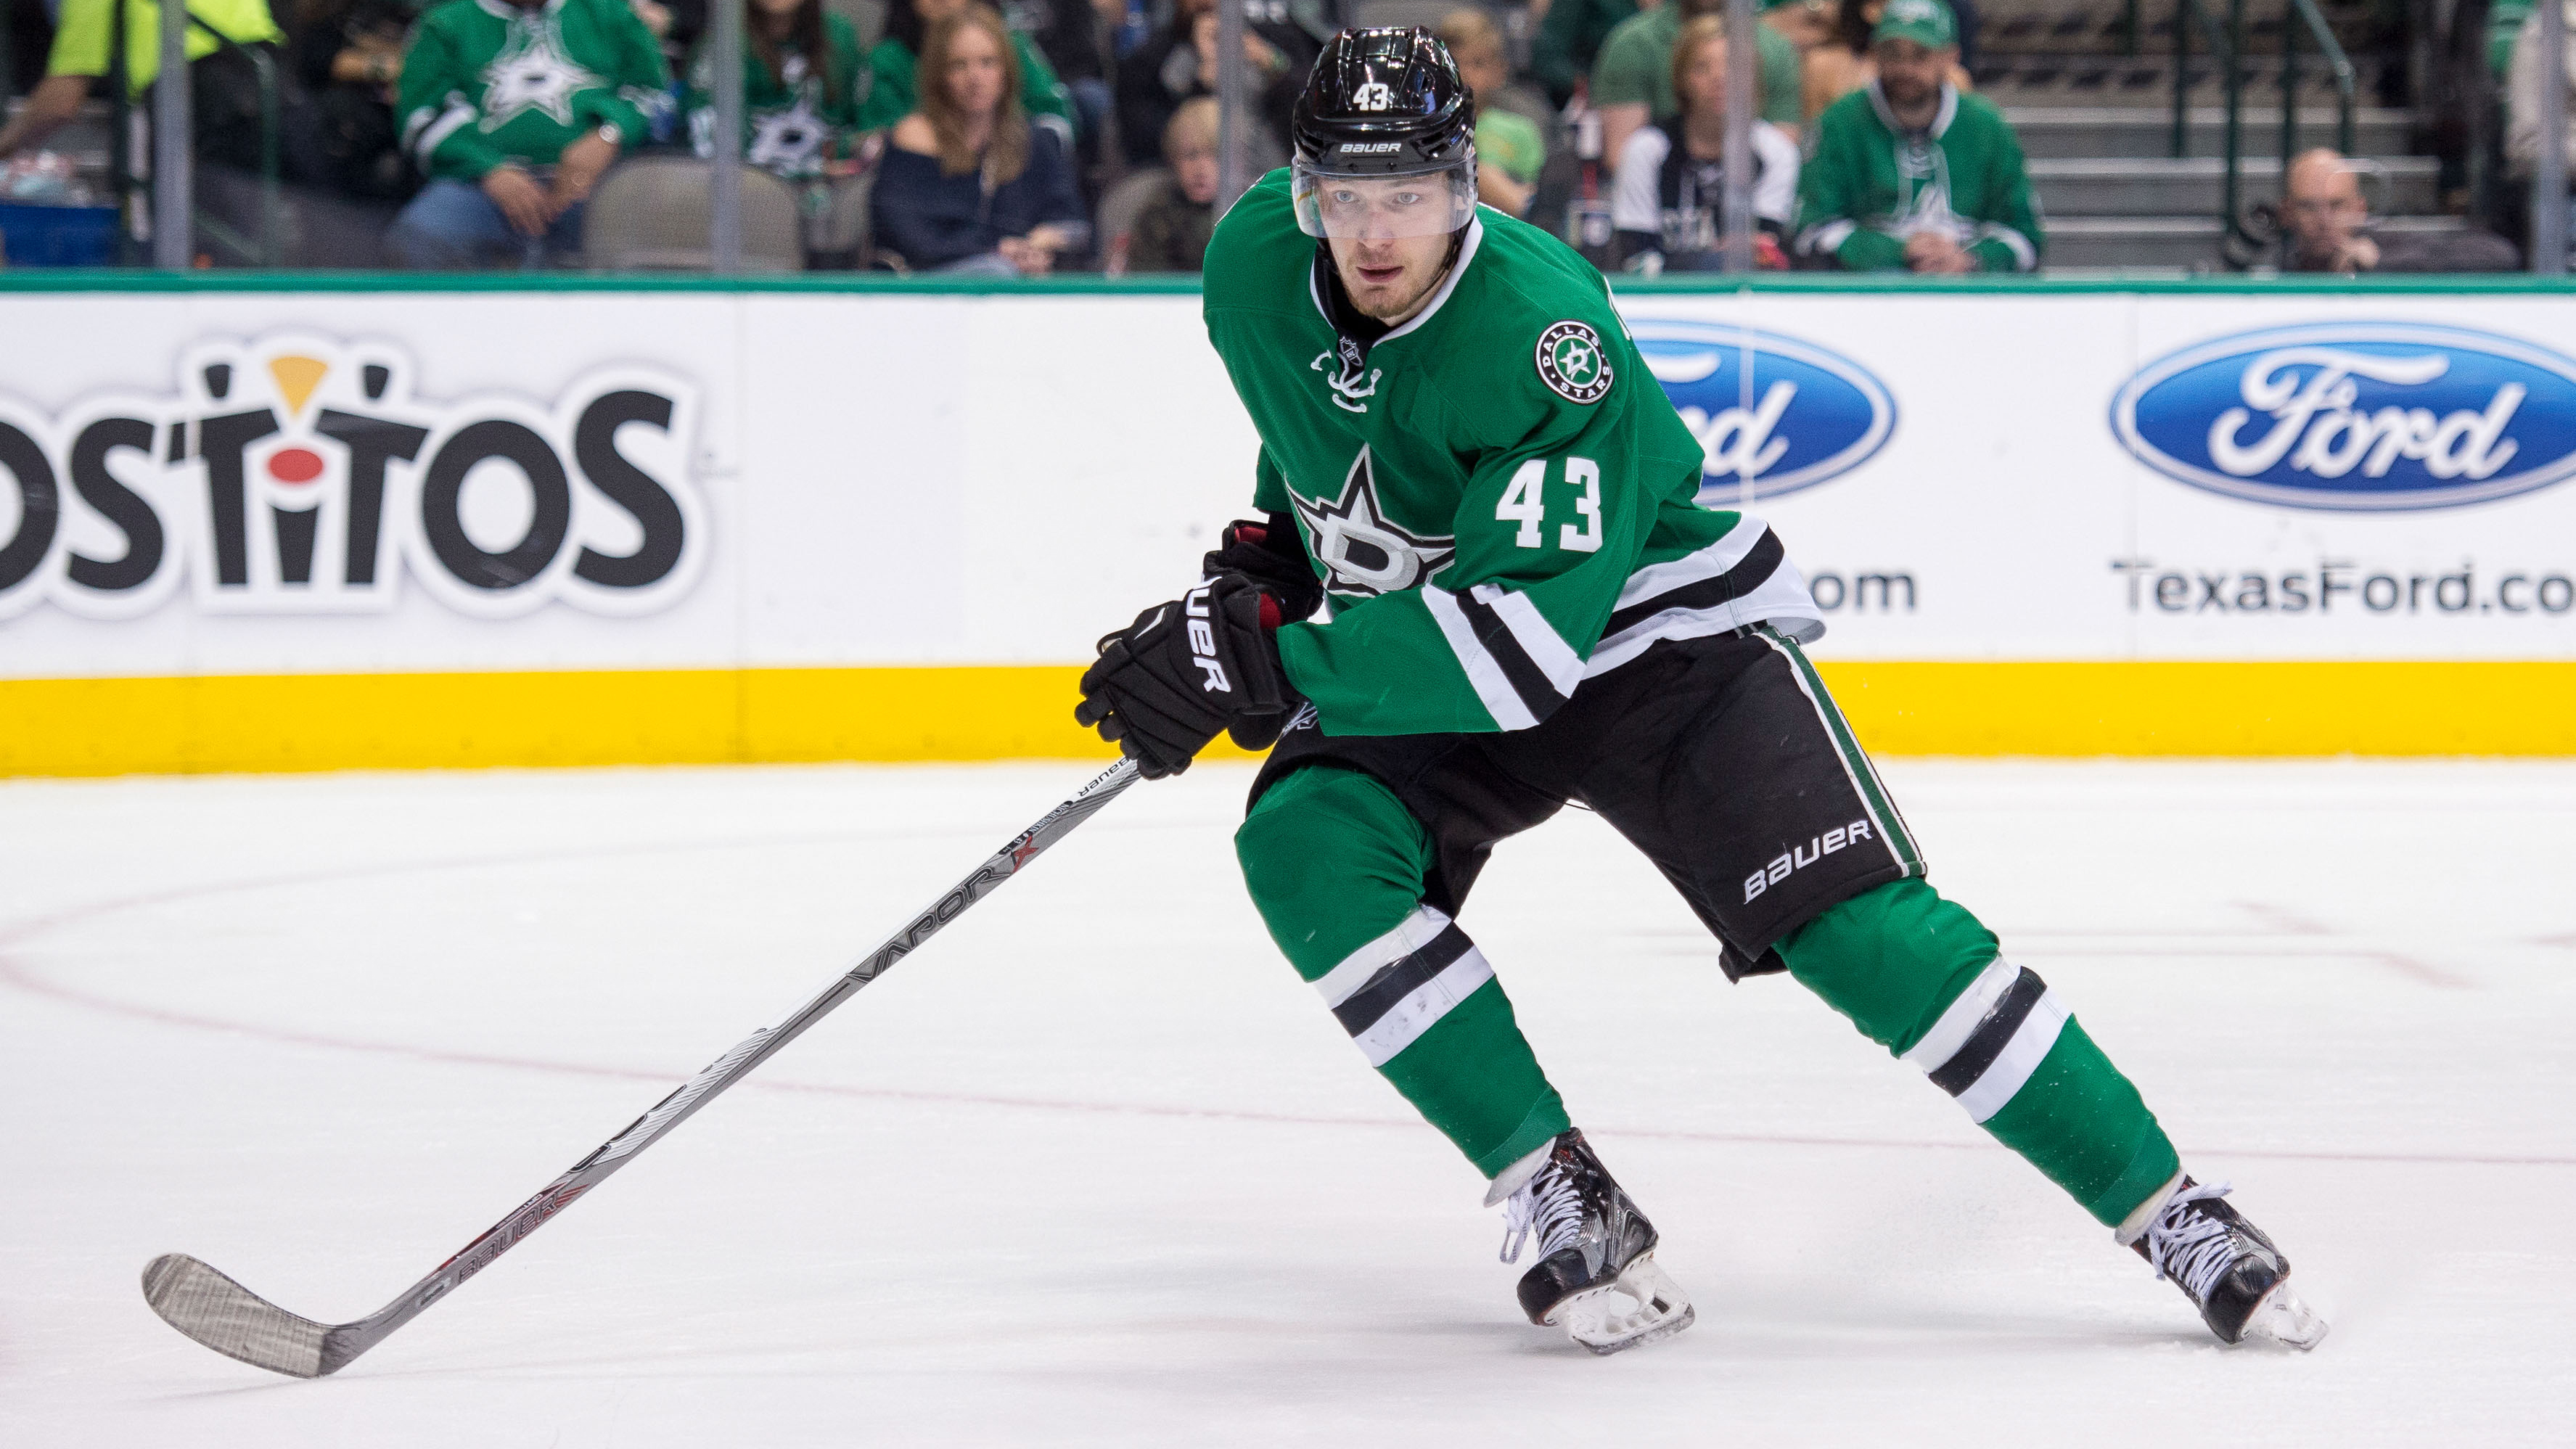 Could Val Nichushkin have helped the Stars this year?